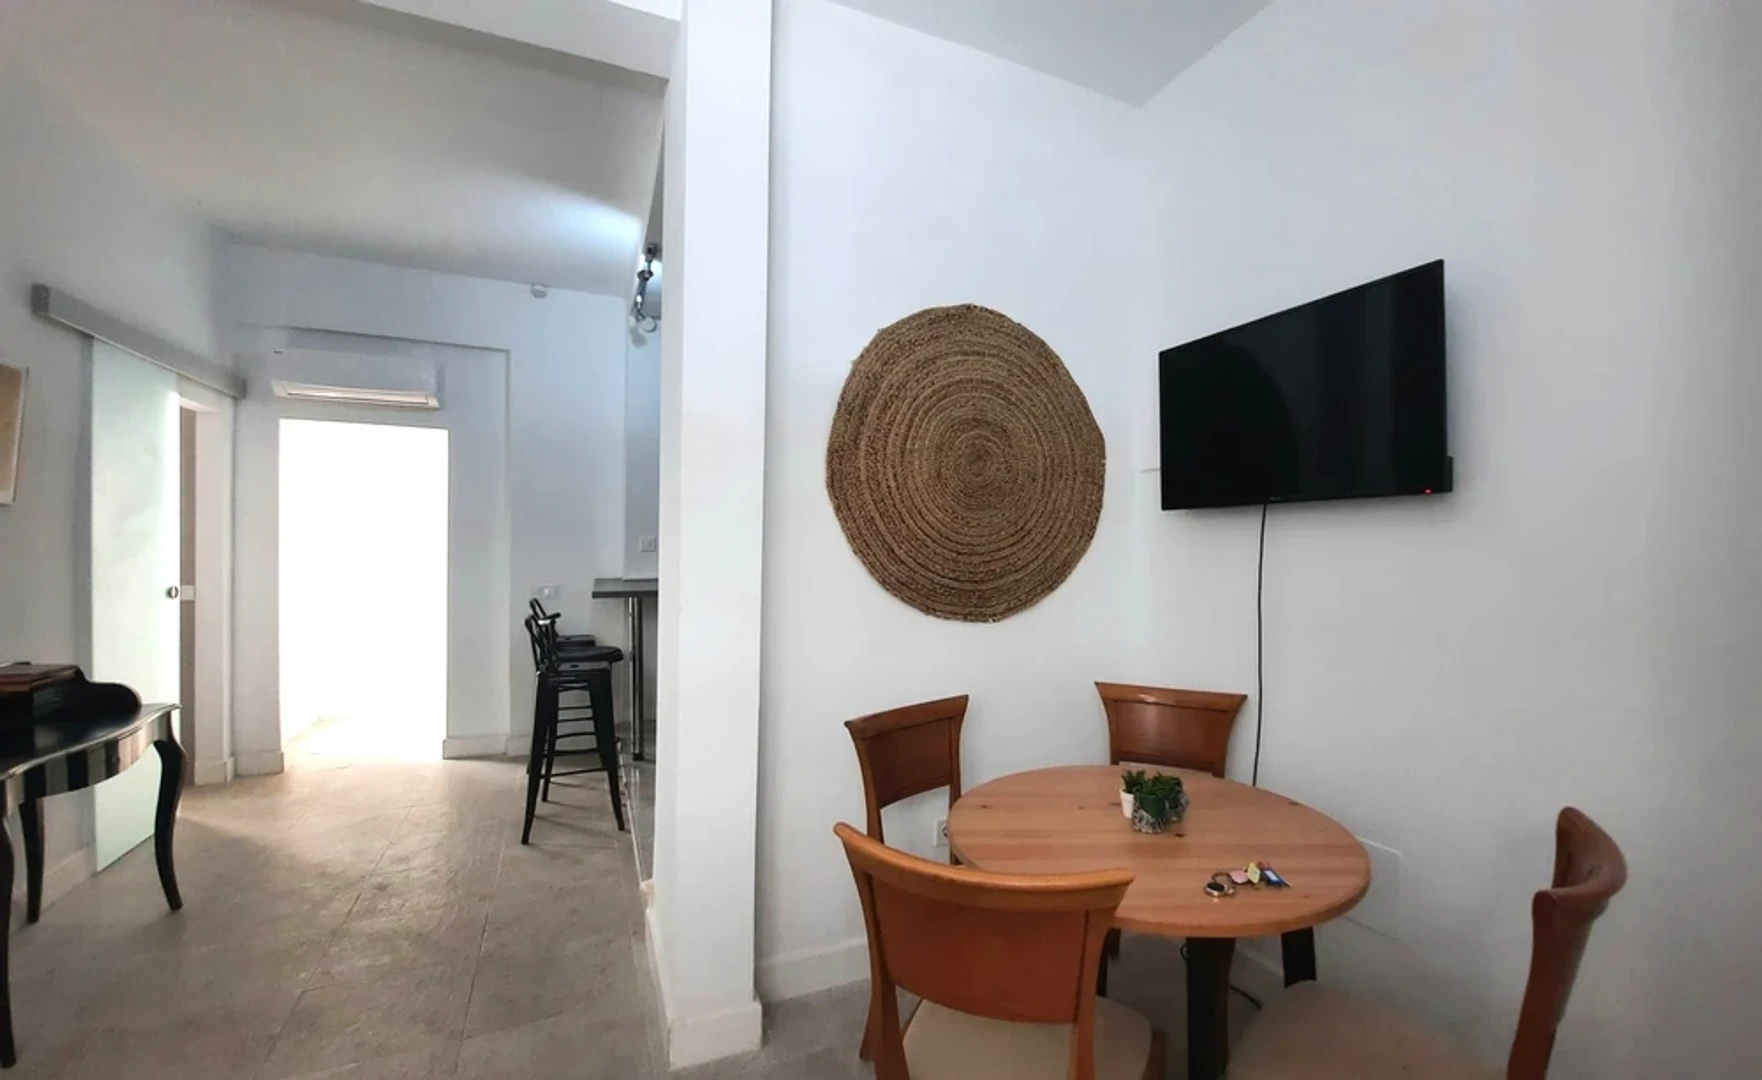 Accommodation with 3 bedrooms in Palma De Mallorca